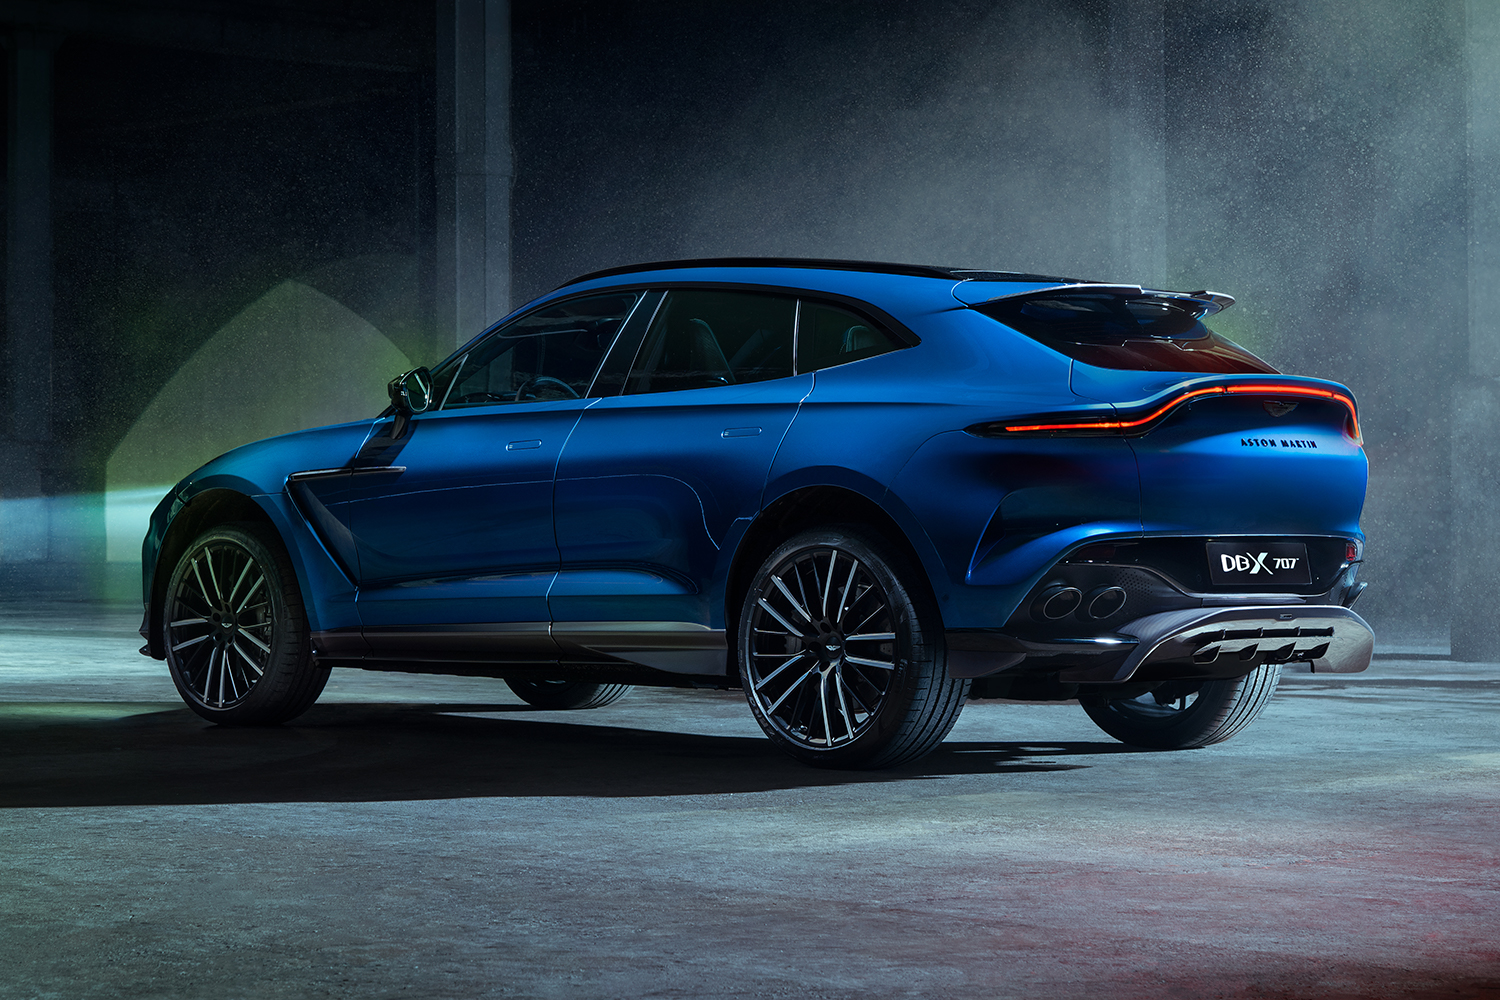 The rear end of the new Aston Martin DBX707 SUV, featuring a new rear bumper. It's the high-performance version of the British automaker's popular new DBX SUV. 